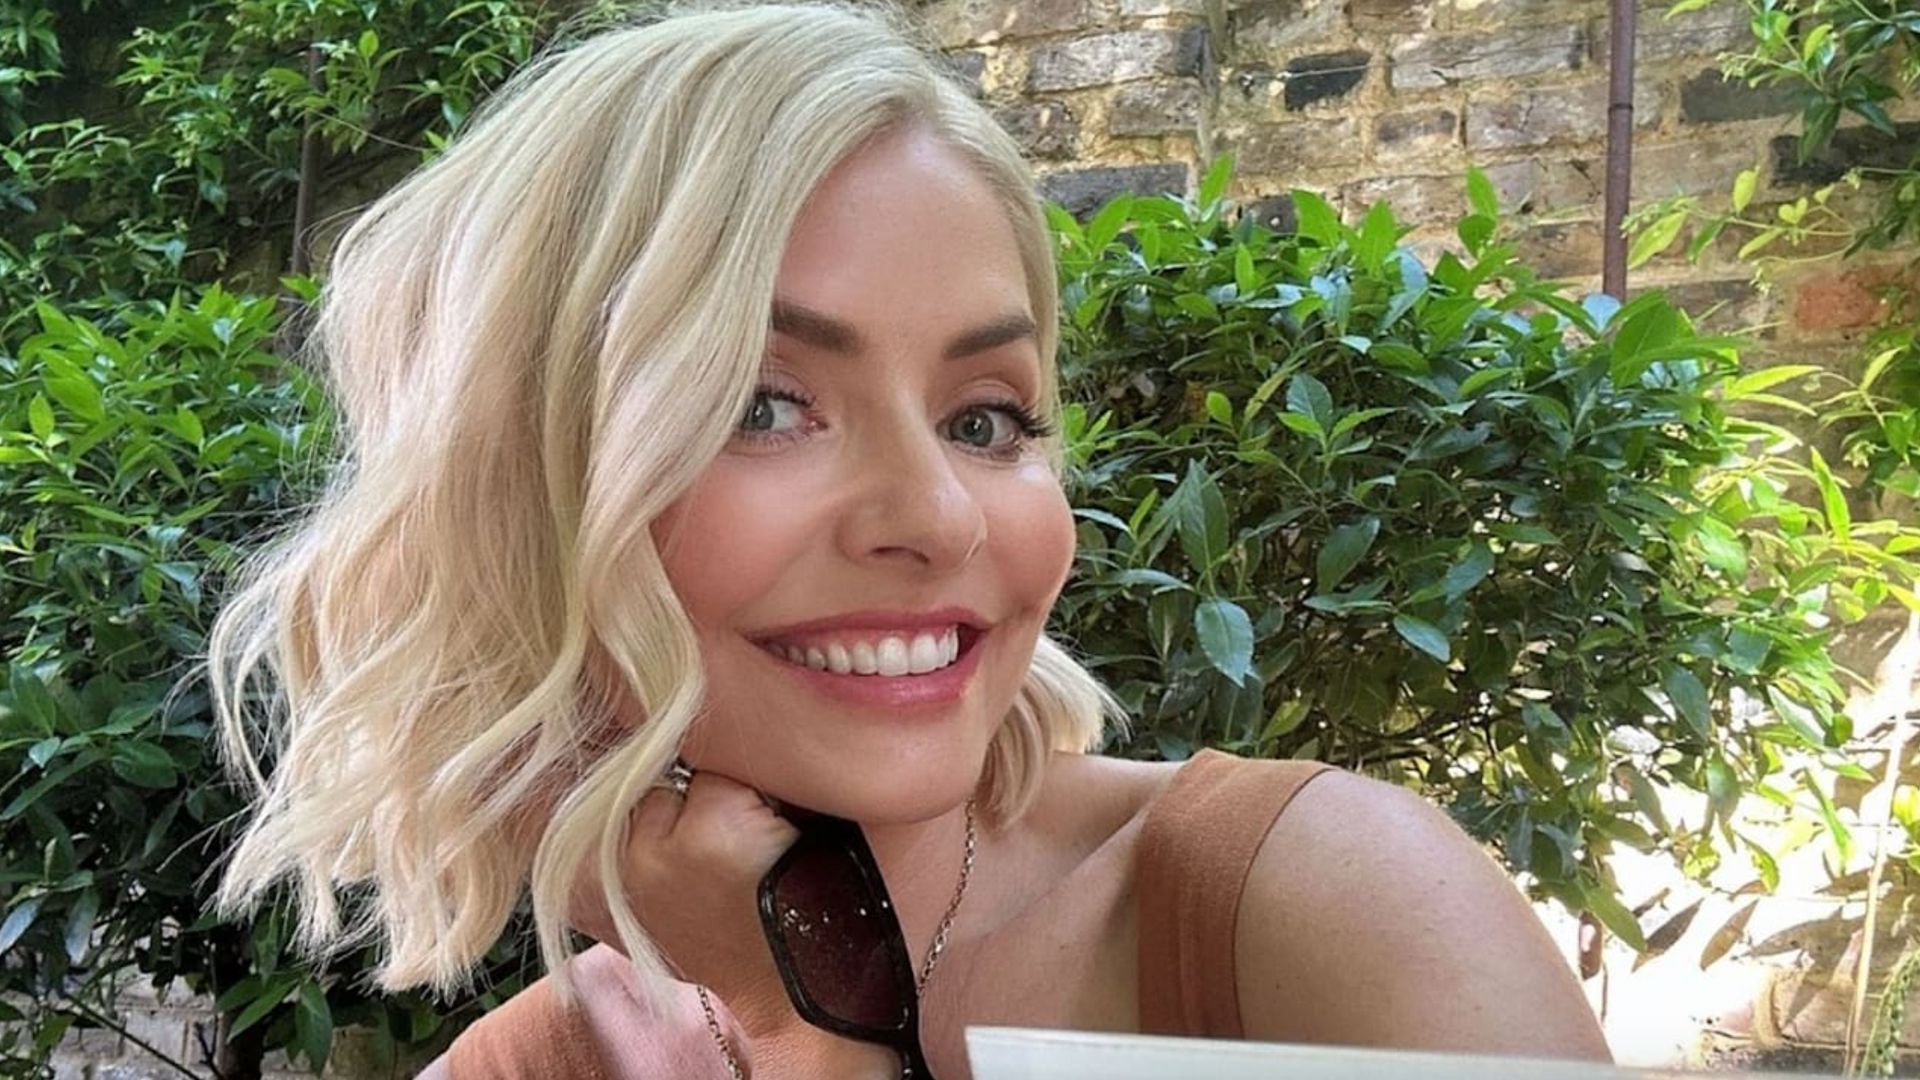 Holly Willoughby looks radiant in makeup-free photo inside £3m London home